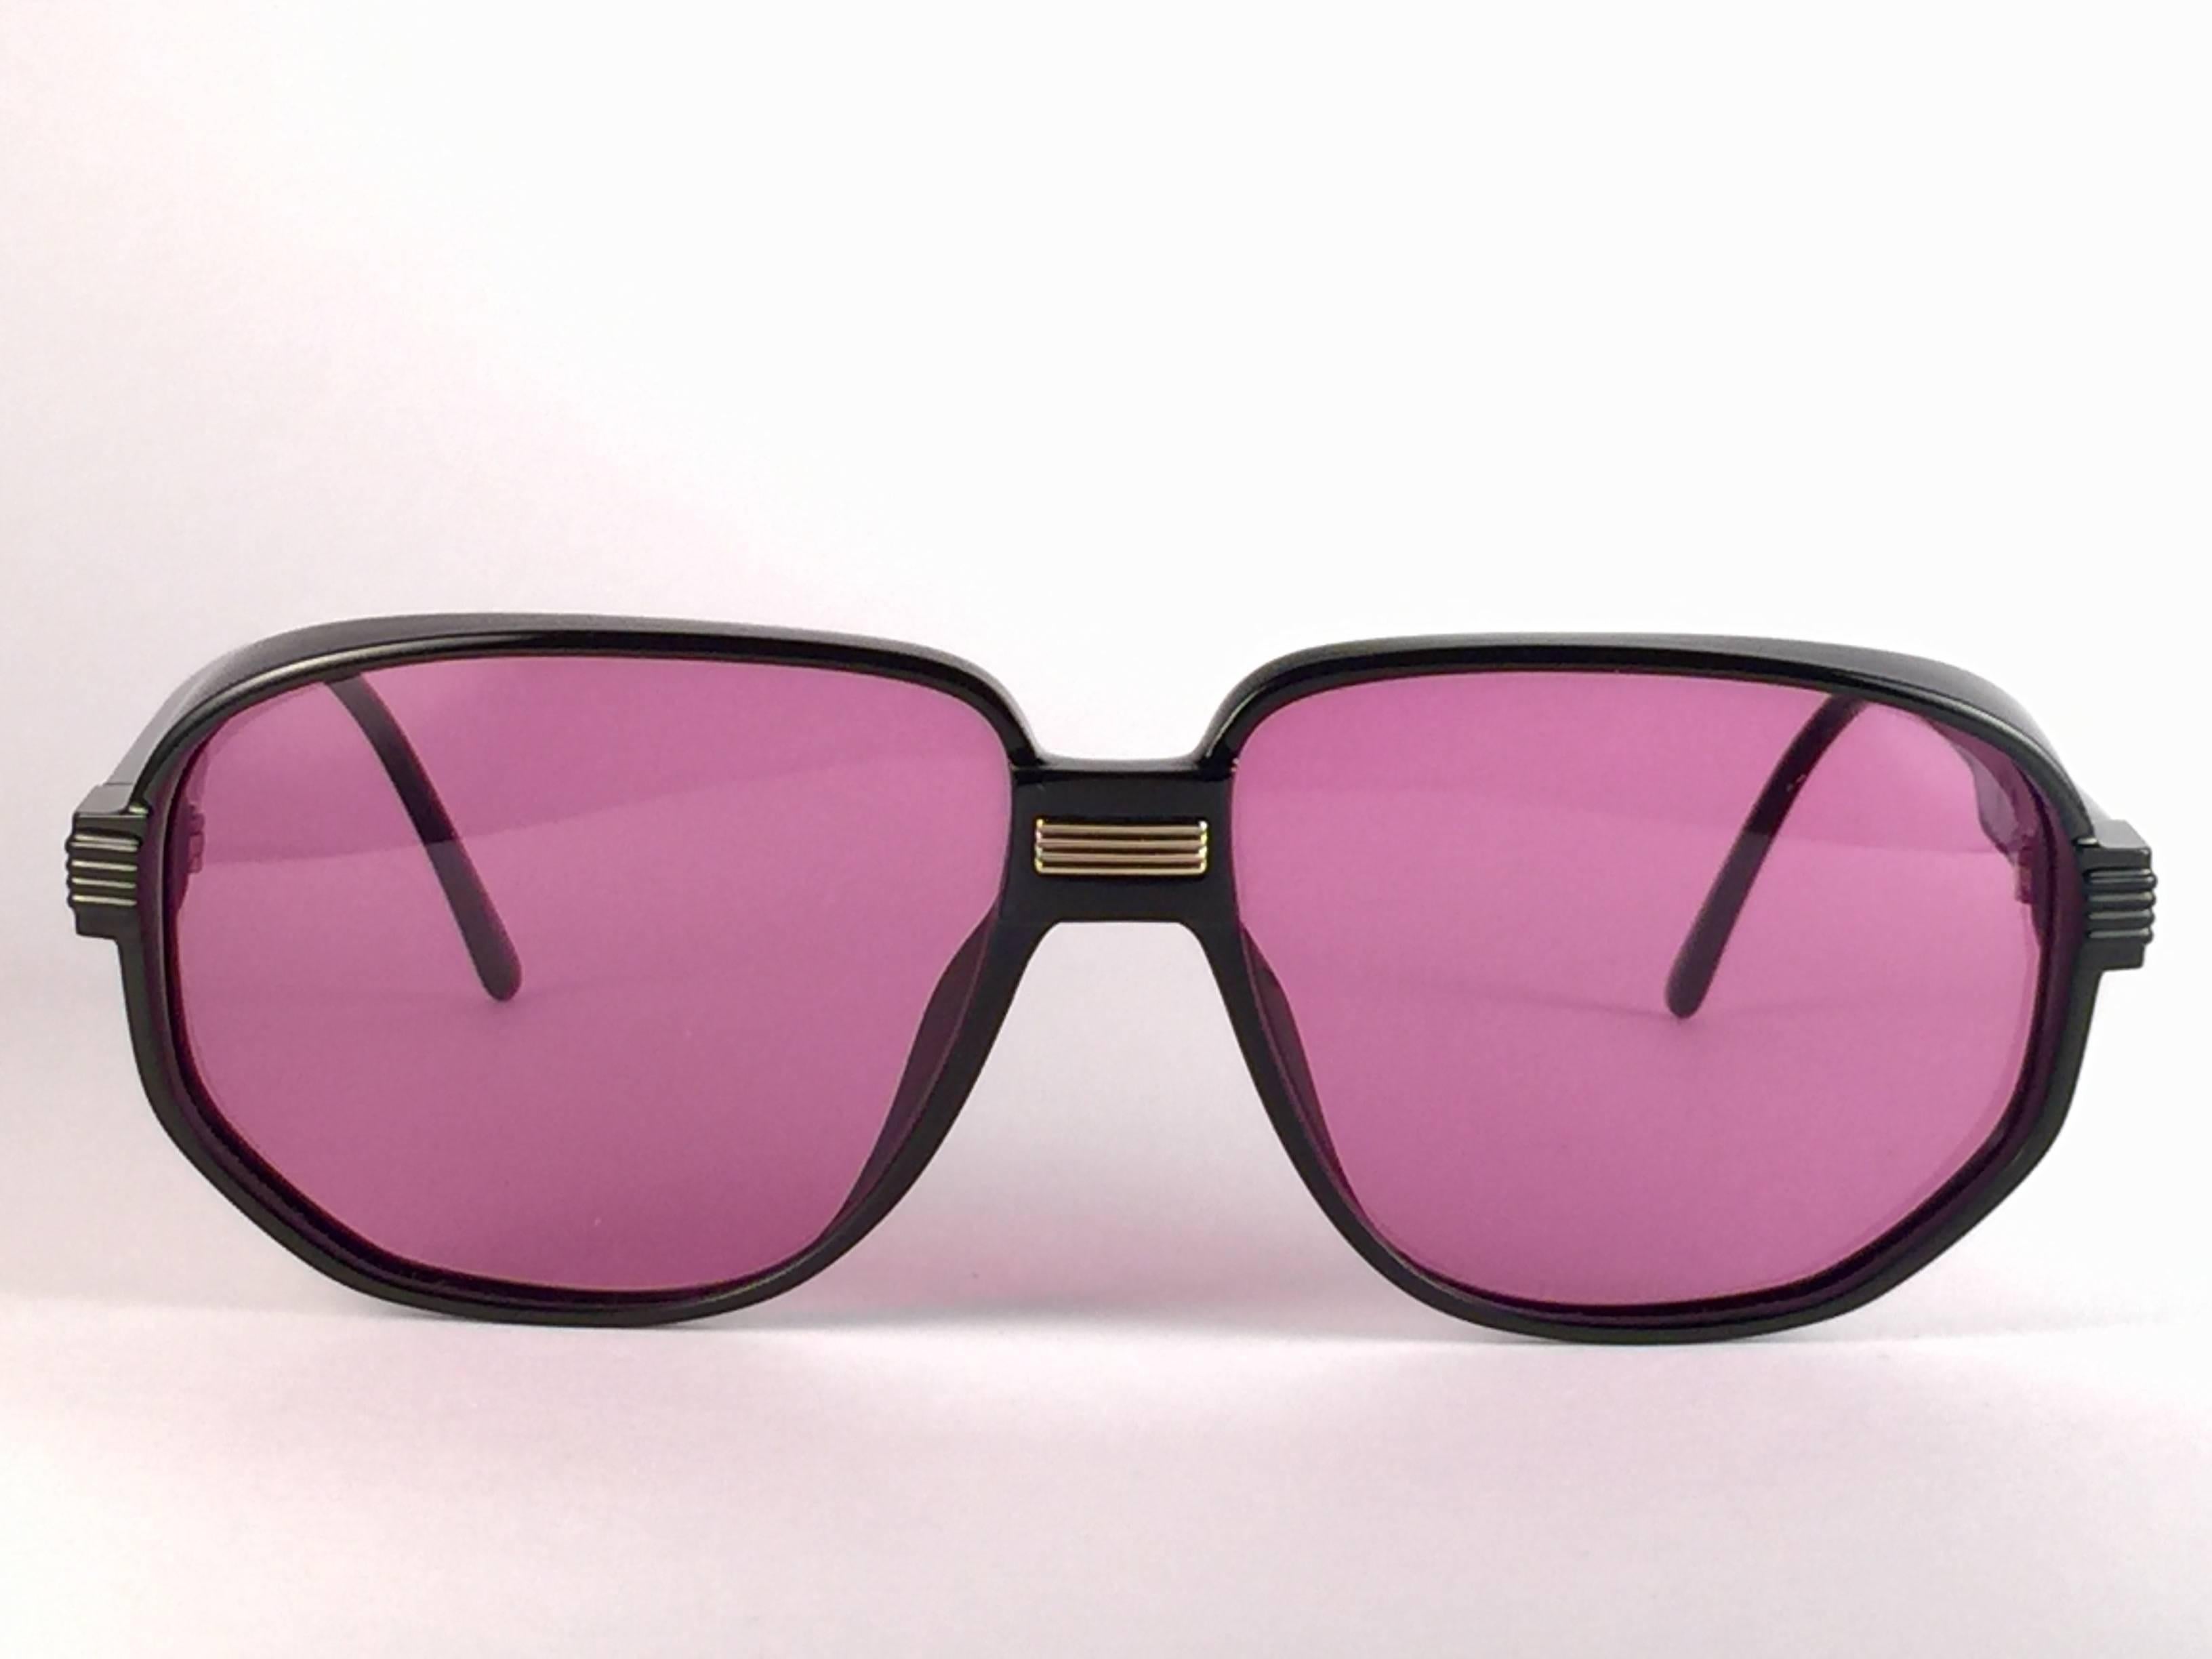 New Vintage Christian Dior 2401 90 sunglasses sleek black with spotless purple lenses. Designed and produced in the1980’s.  
Made by Optyl. Manufactured in Germany.  

New! never worn or displayed.  Flawless pair!